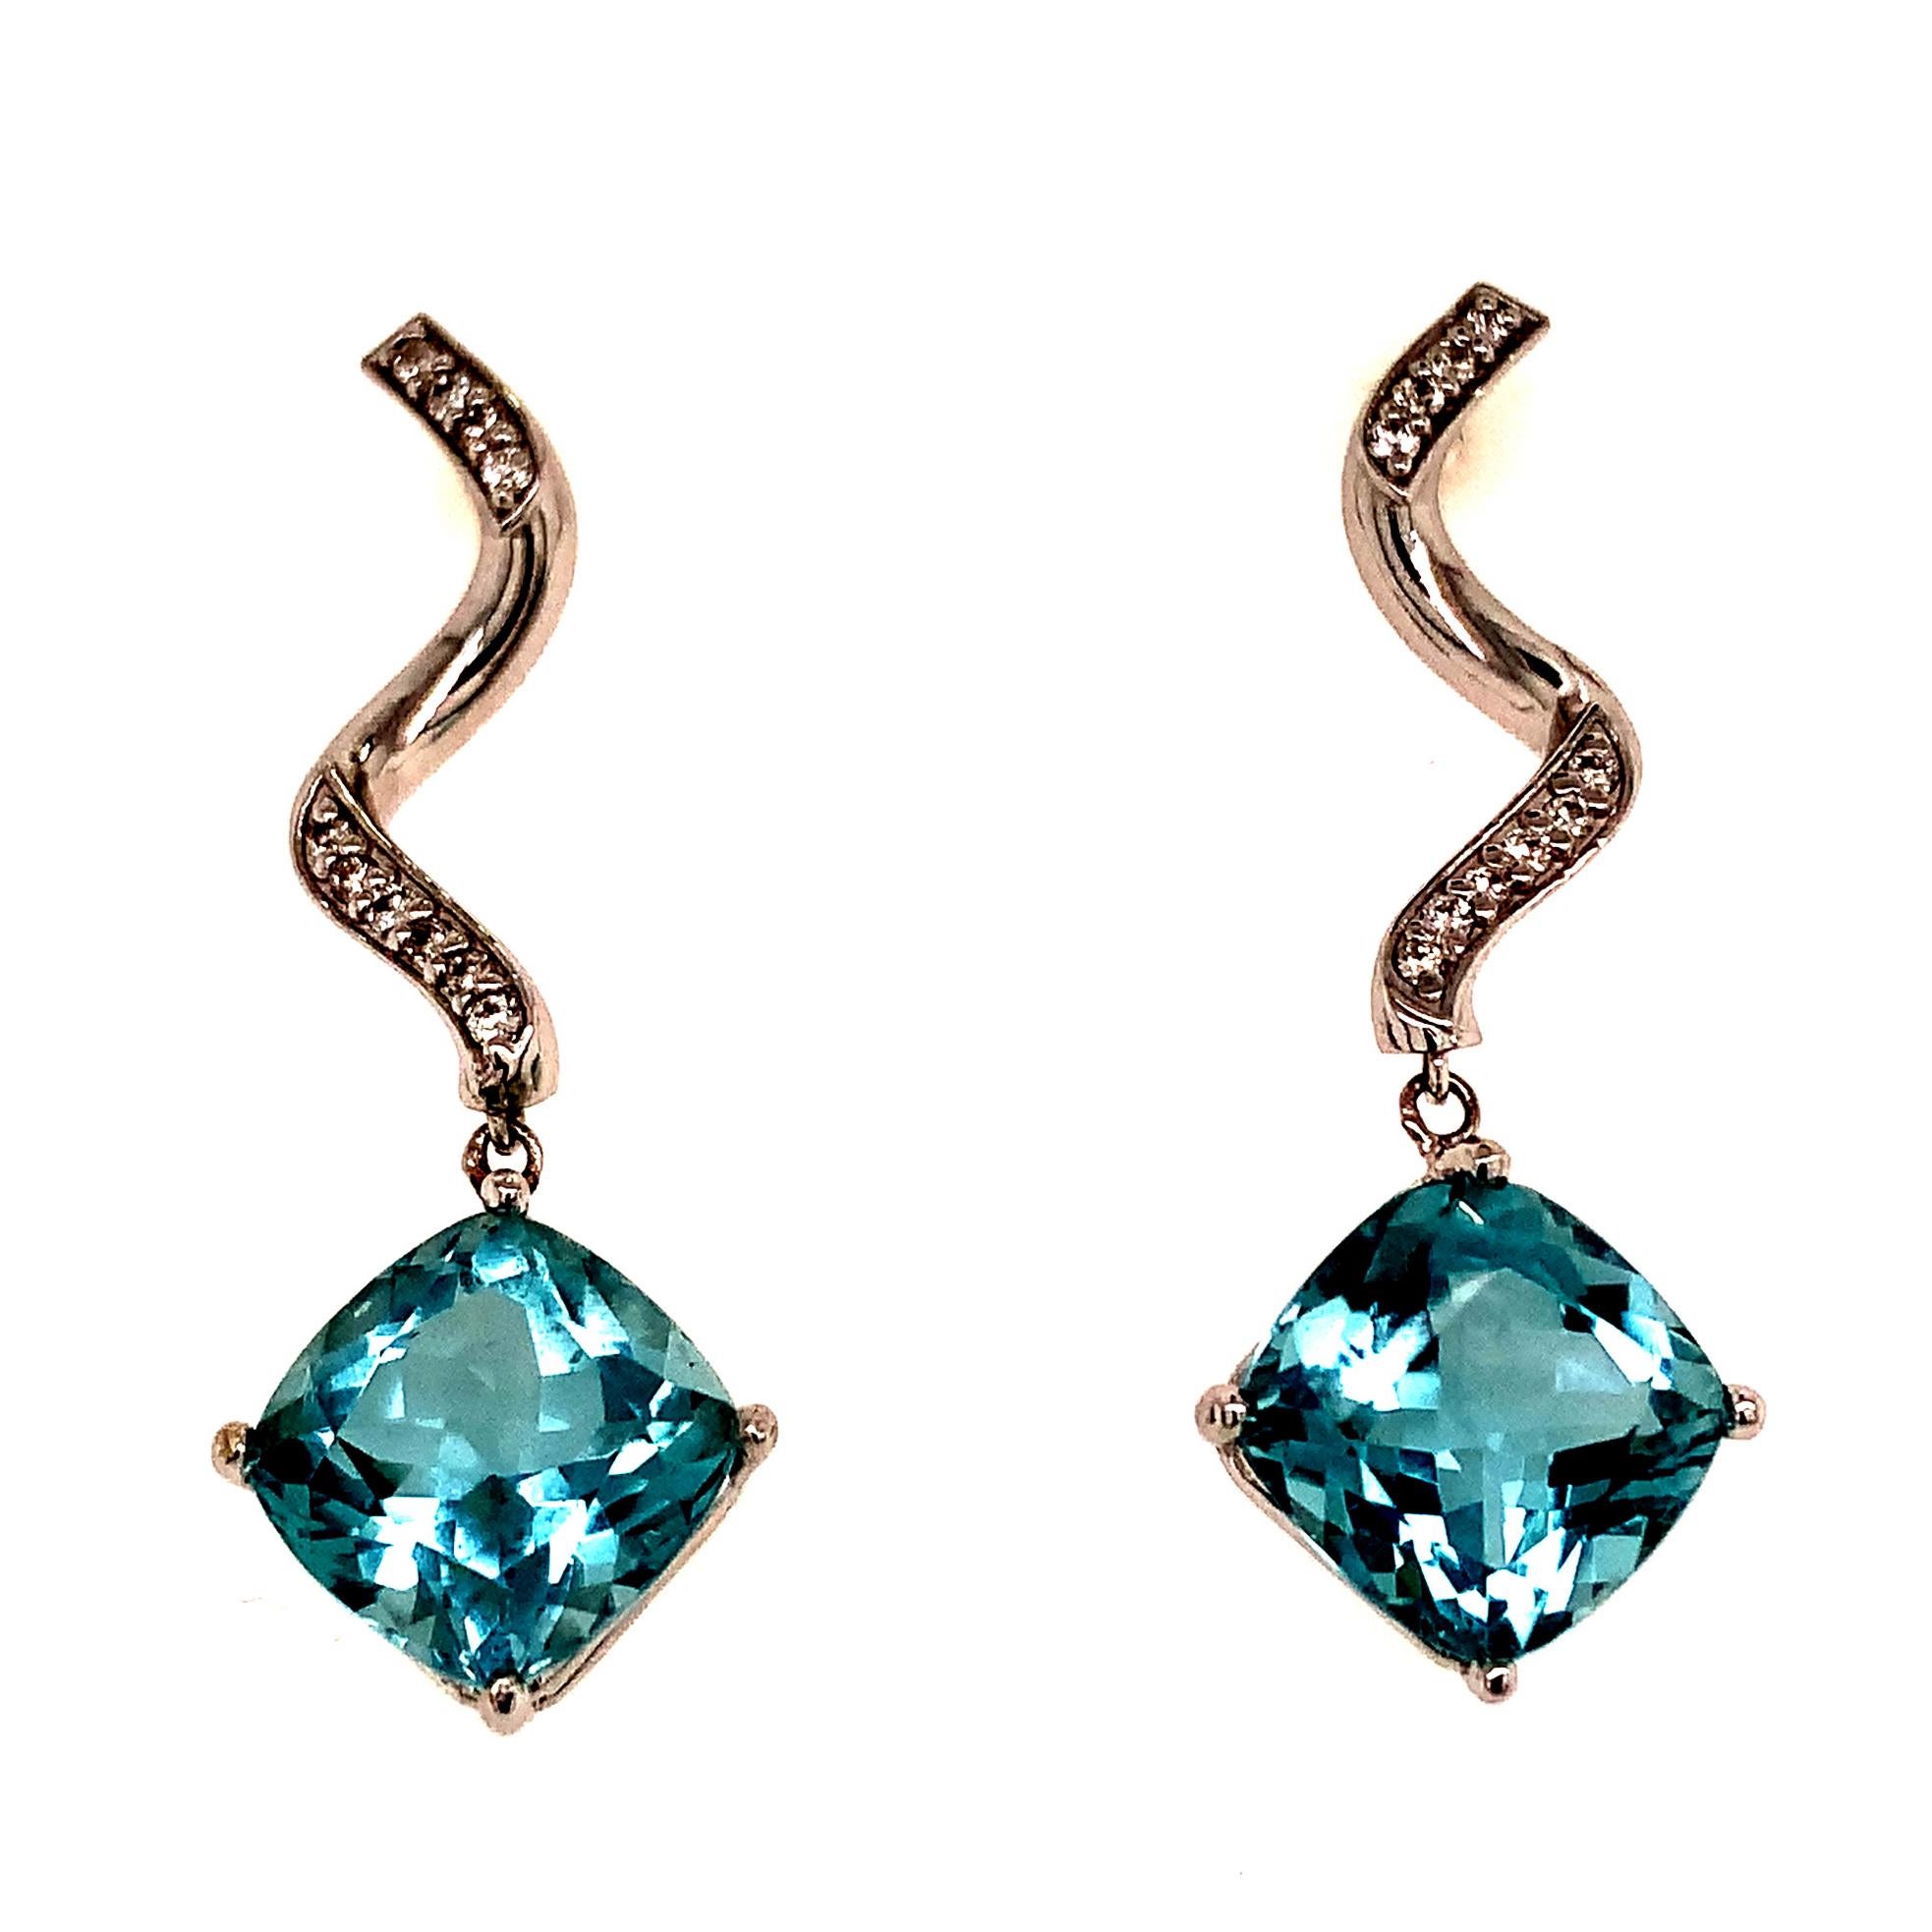 Natural Aquamarine Diamond Earrings 14k Gold 8.15 TCW Certified For Sale 5